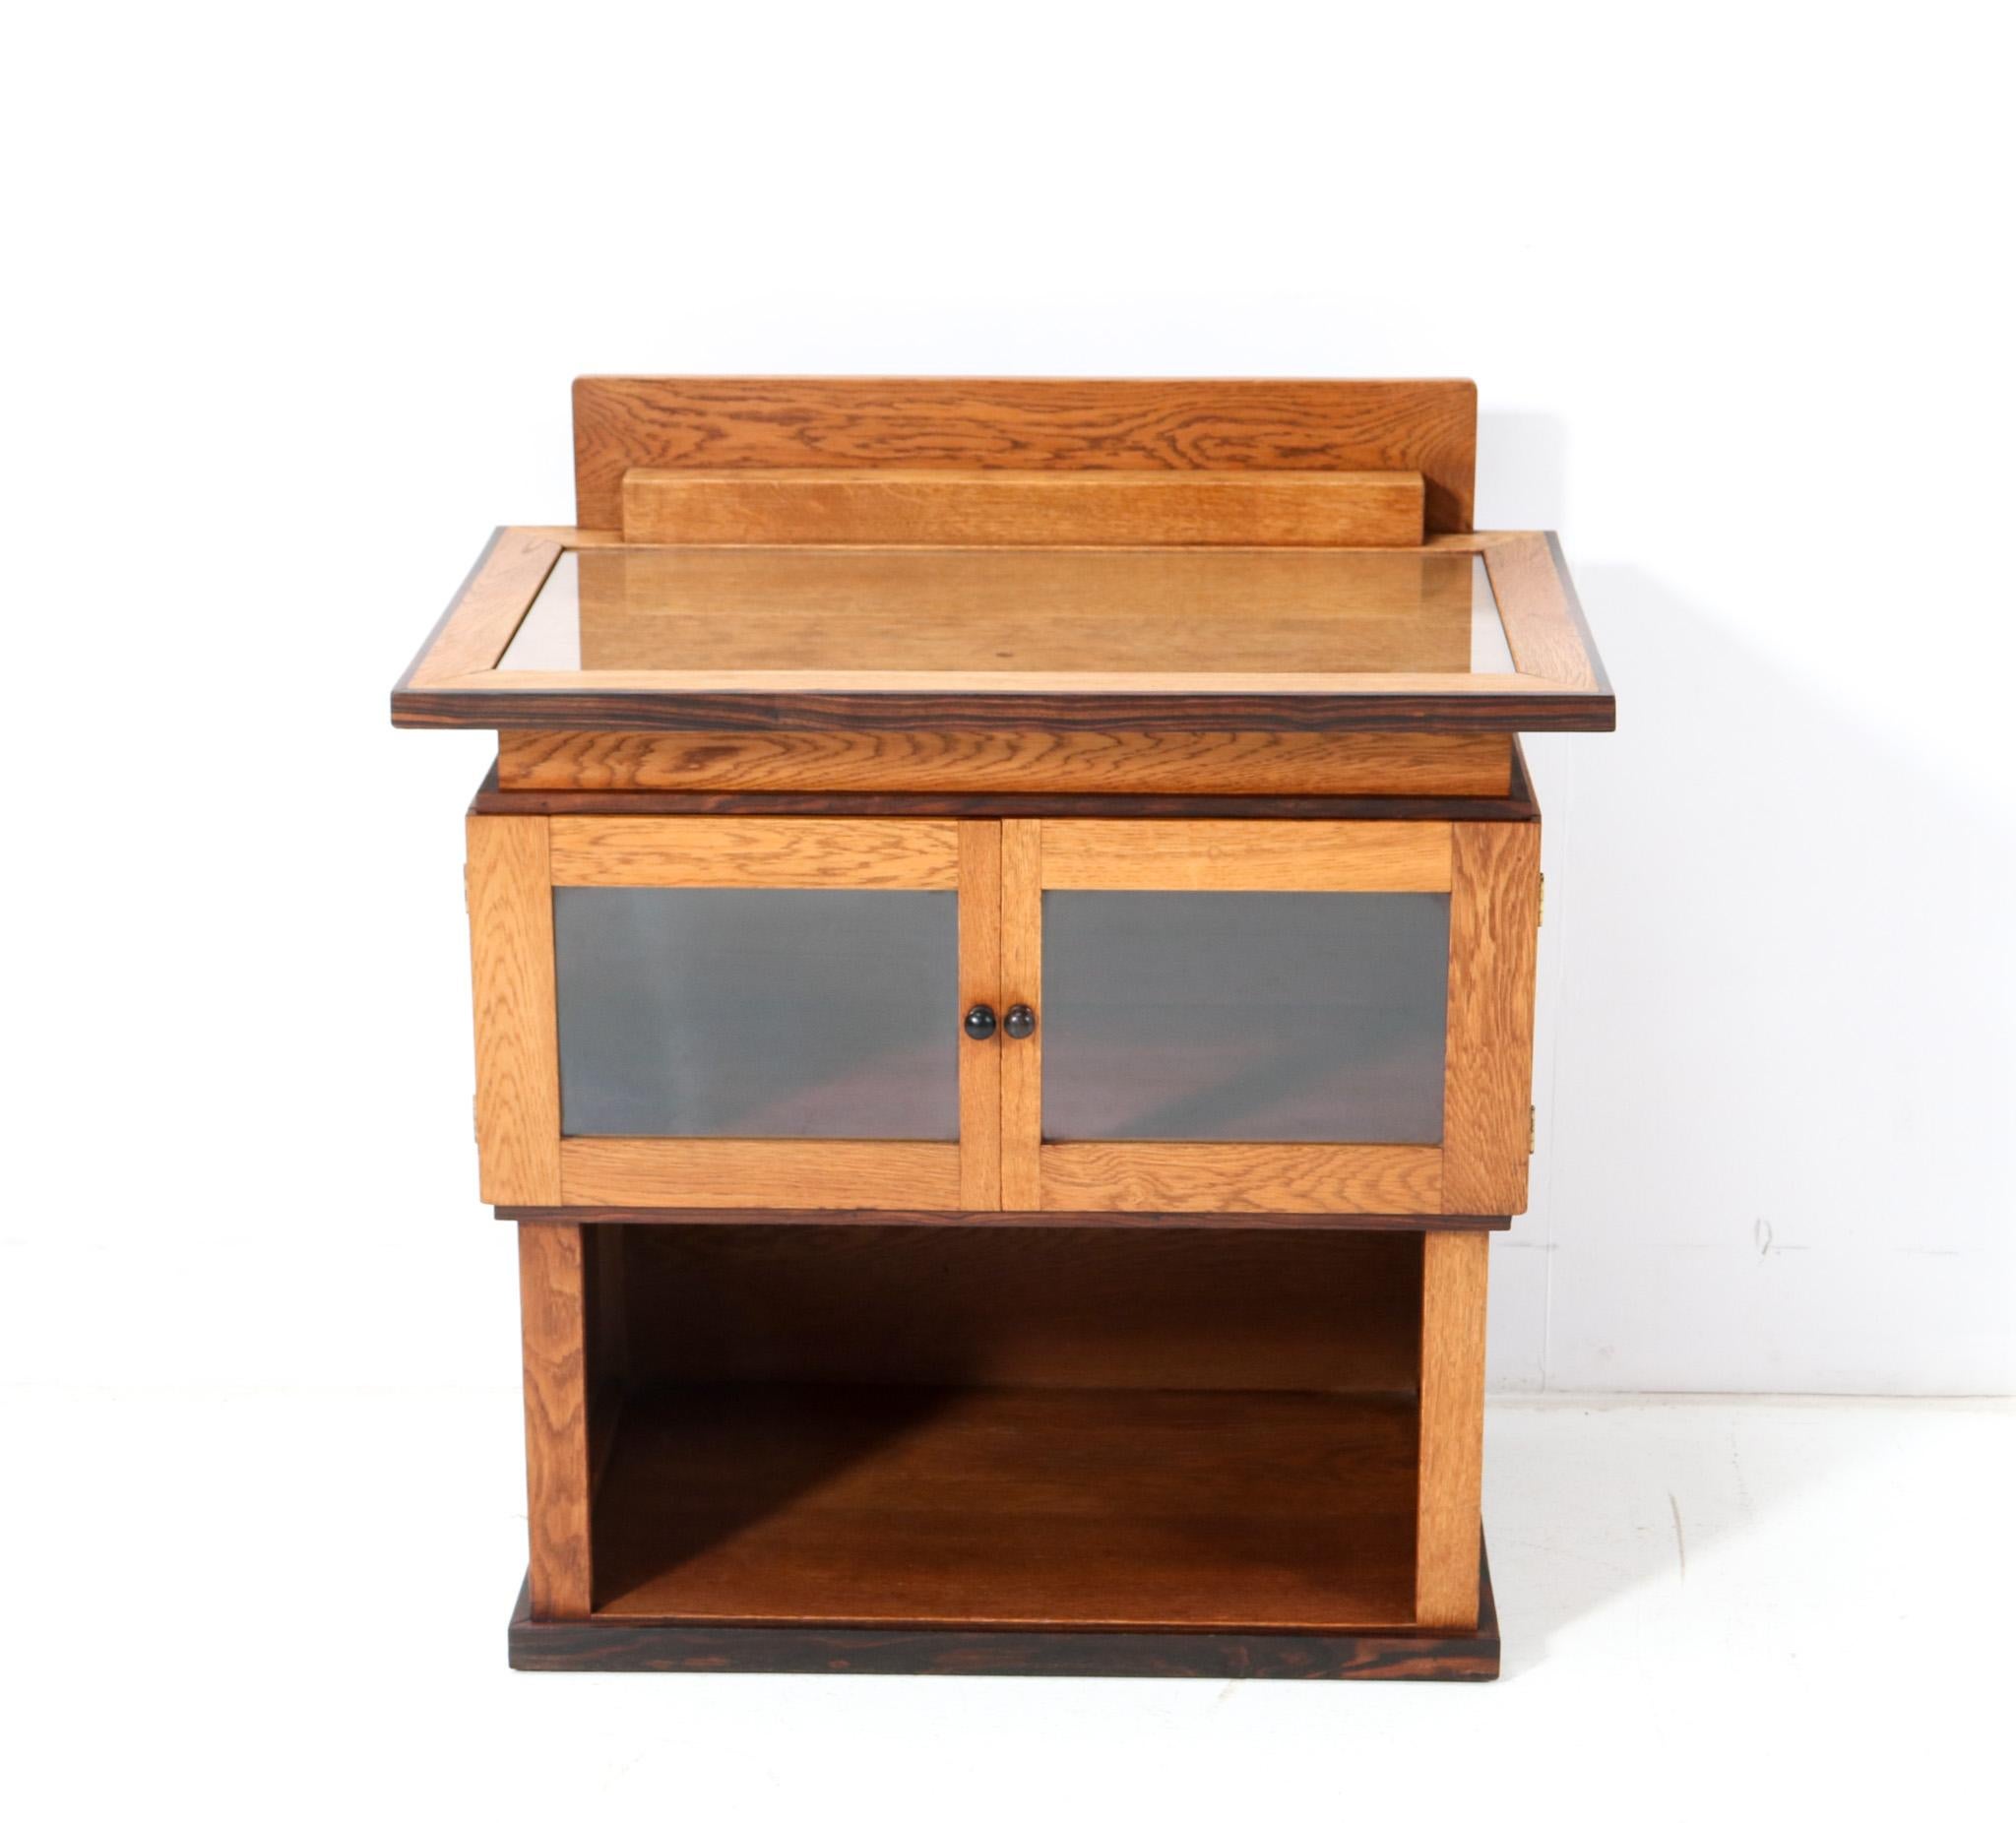 Stunning and rare Art Deco Modernist tea cabinet.
Design by P.E.L. Izeren for De Genneper Molen.
Solid oak with original oak veneered frame with original macassar ebony knobs on both doors.
Original glass top.
Purchased by the former owners in